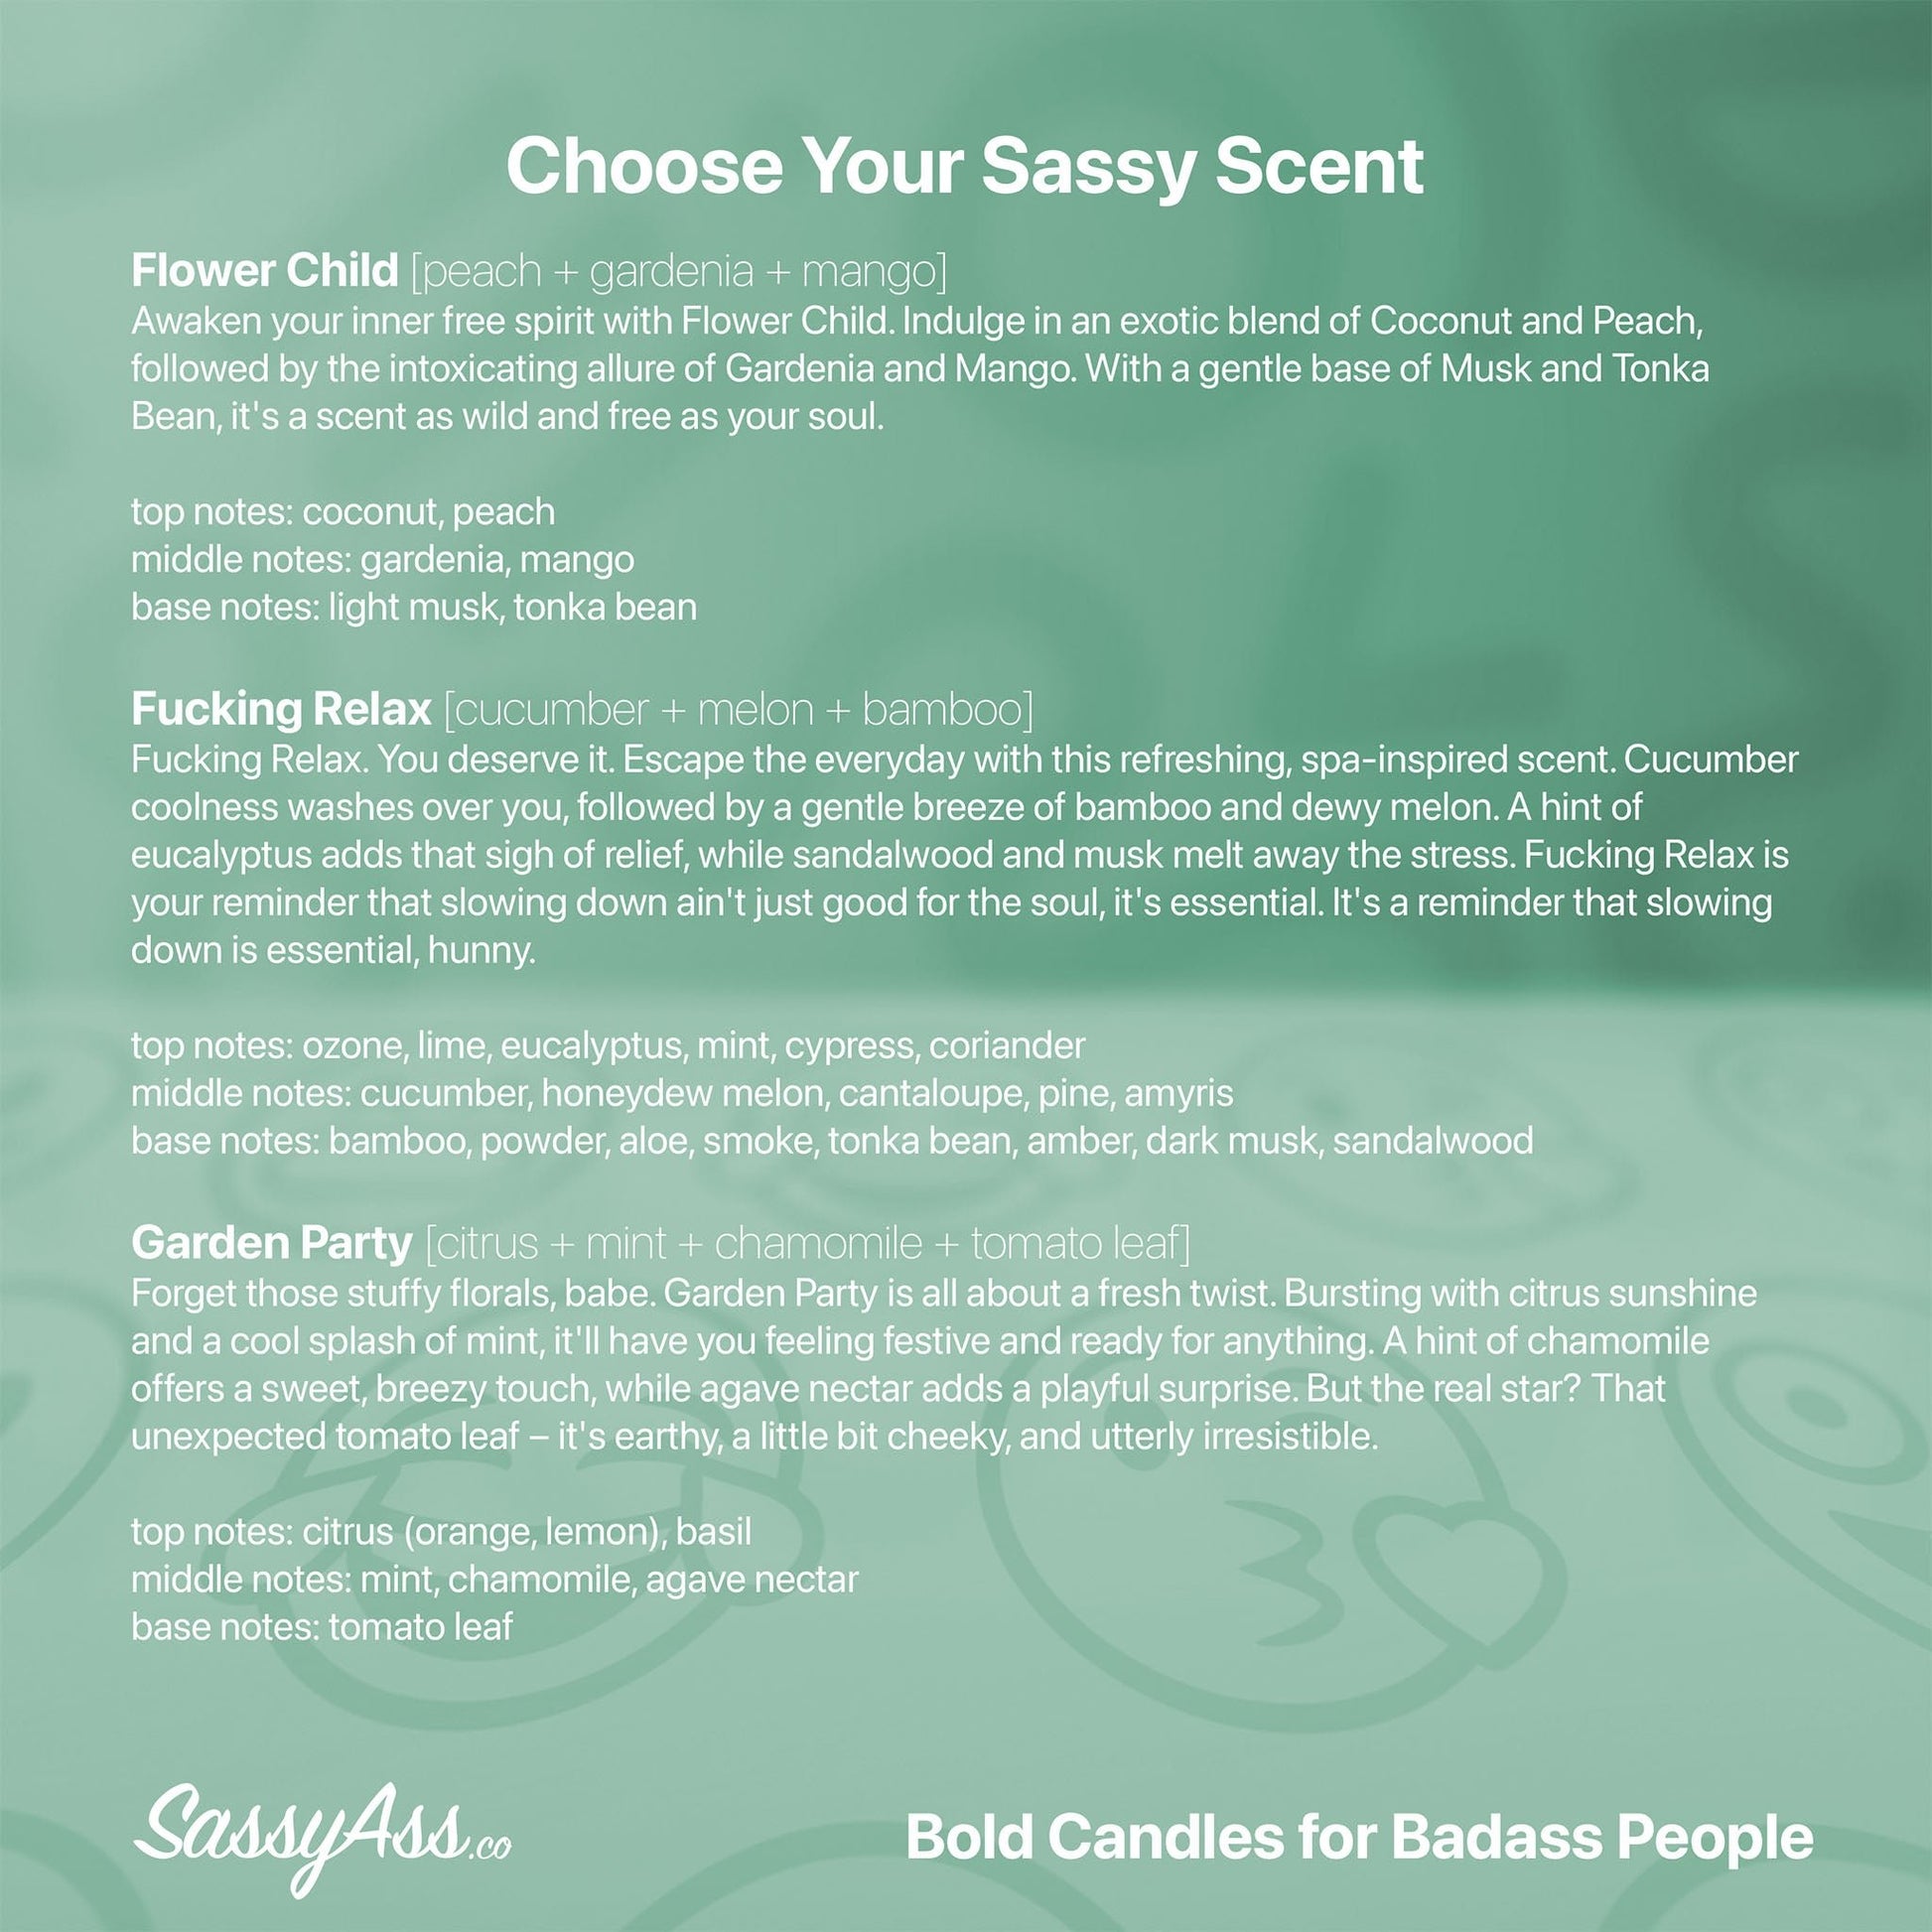 Manifesting Bad Bunny In My DMs - Scented Soy Candle, Playful Music Lover's Delight - the back cover of the book choose your sassy scent - SassyAss.co